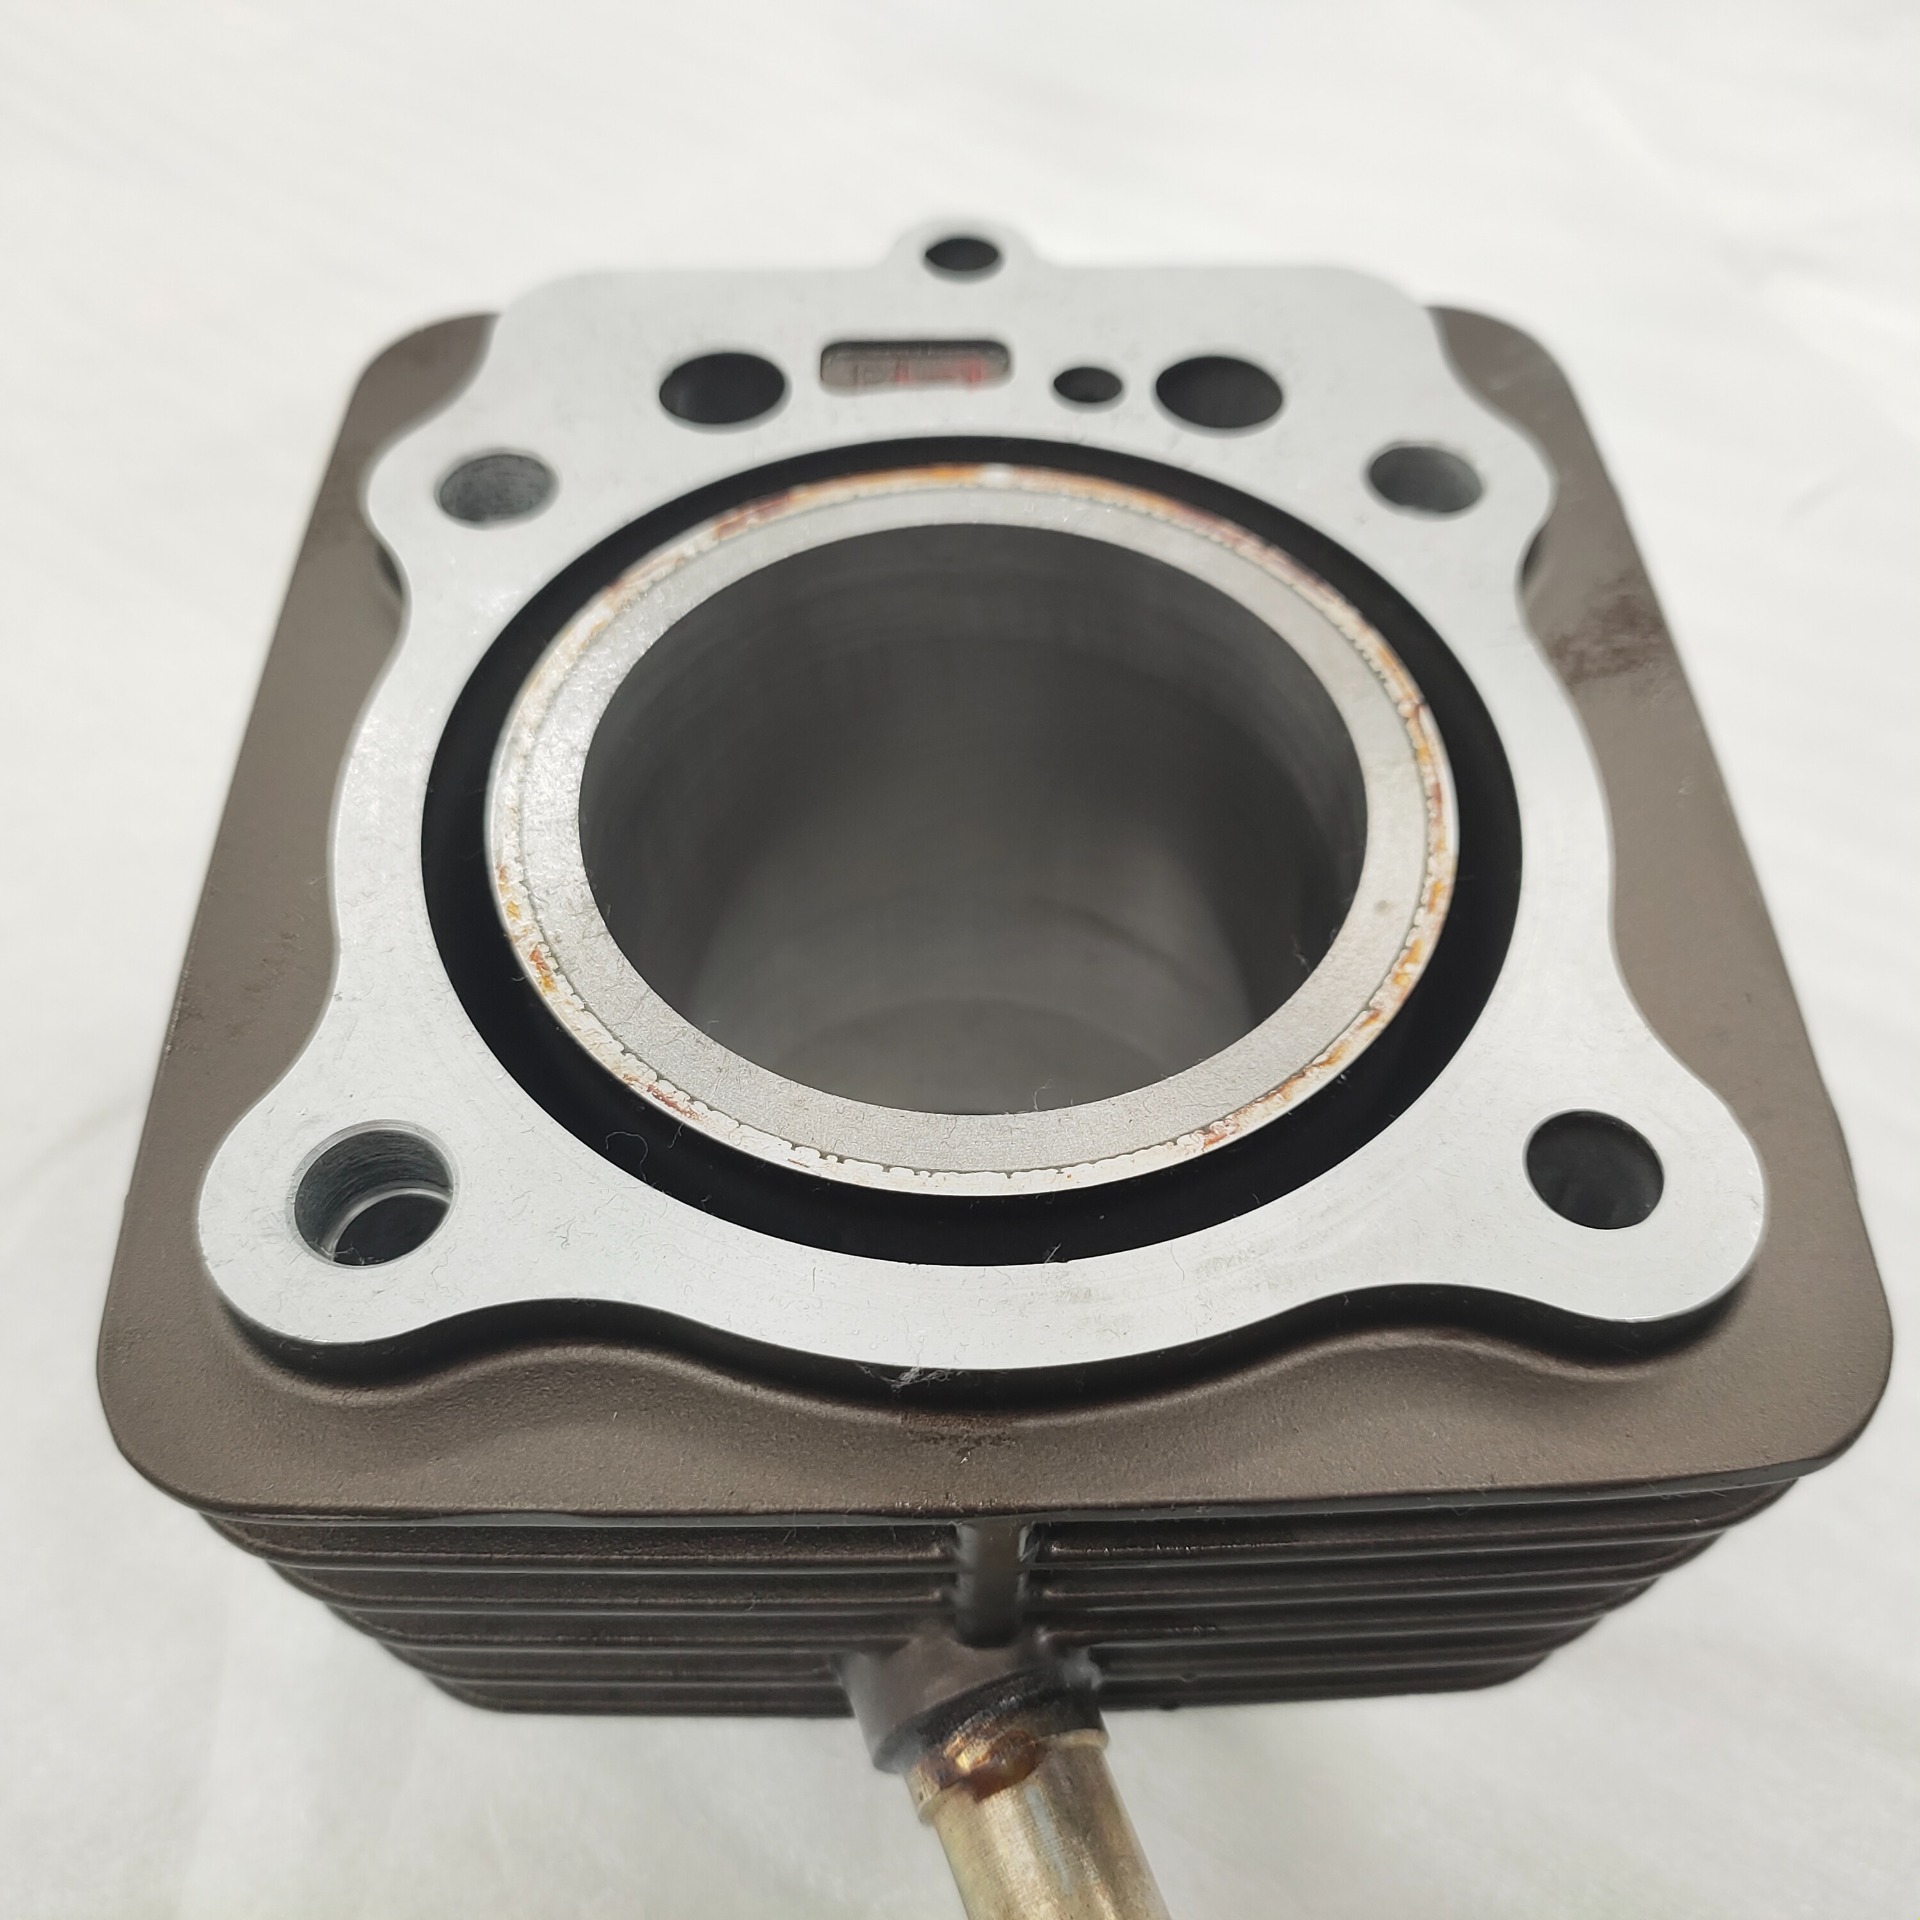 Factory Price engine cylinder body cylinder block used For tricycle 3 wheels motorcycle Aluminum casting motorcycle engine parts